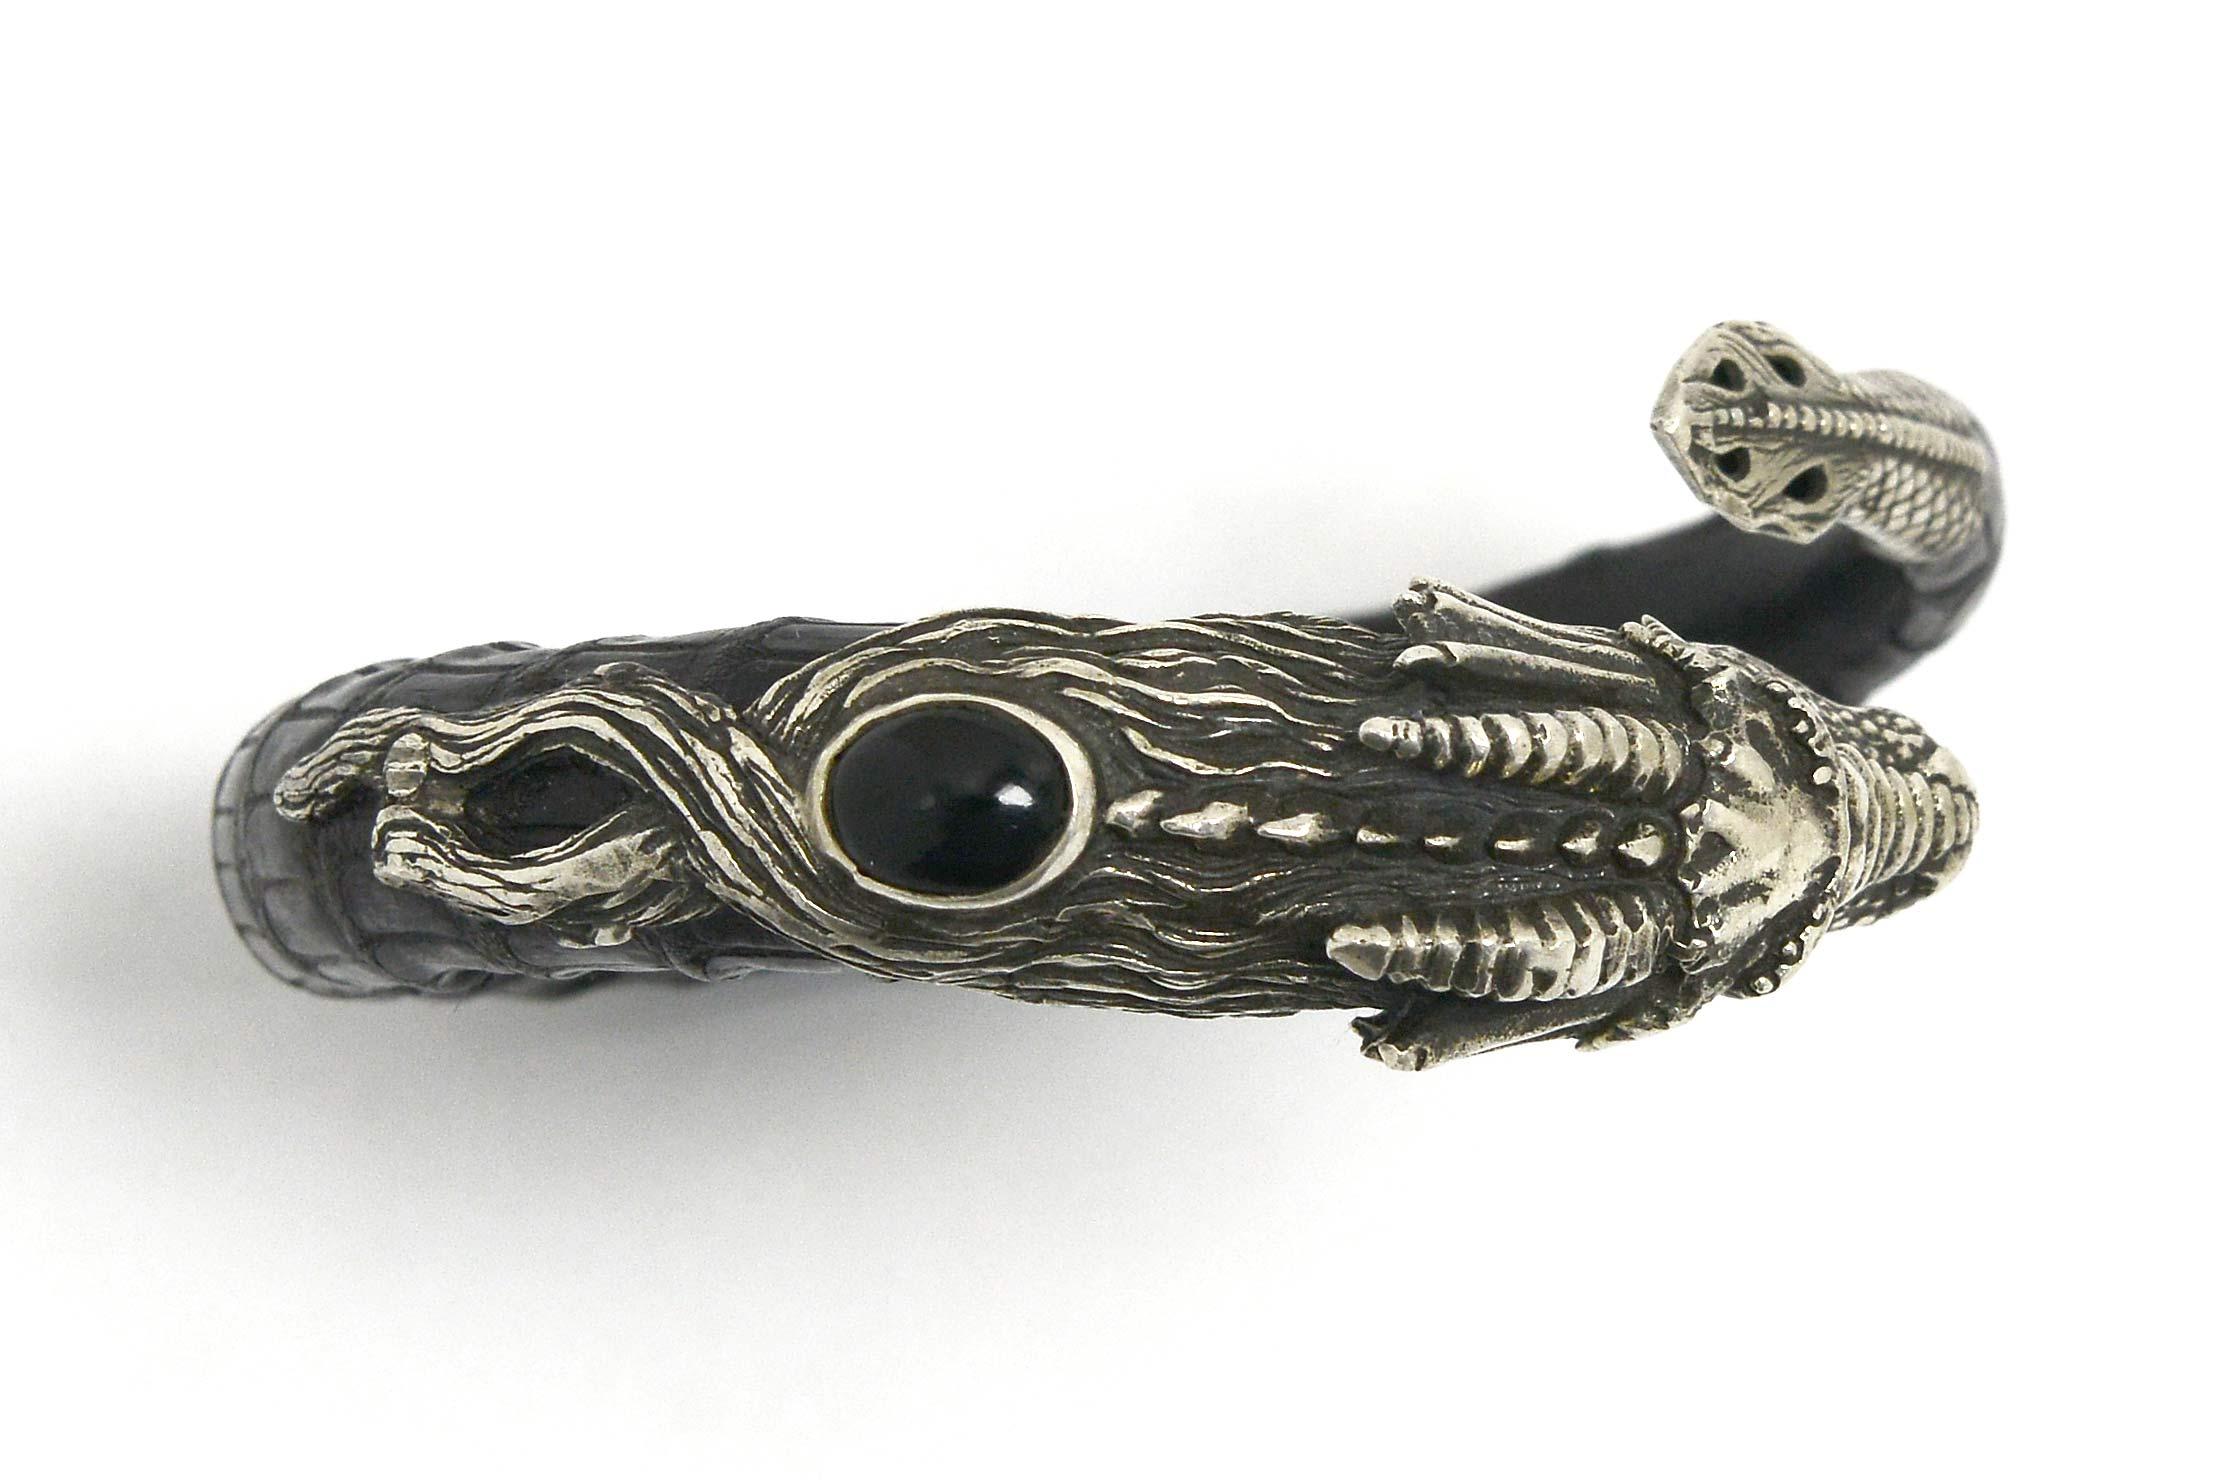 Gothic Revival Game of Thrones Dragon Bracelet Ostrich Leather Sterling Silver Arm Cuff Bangle